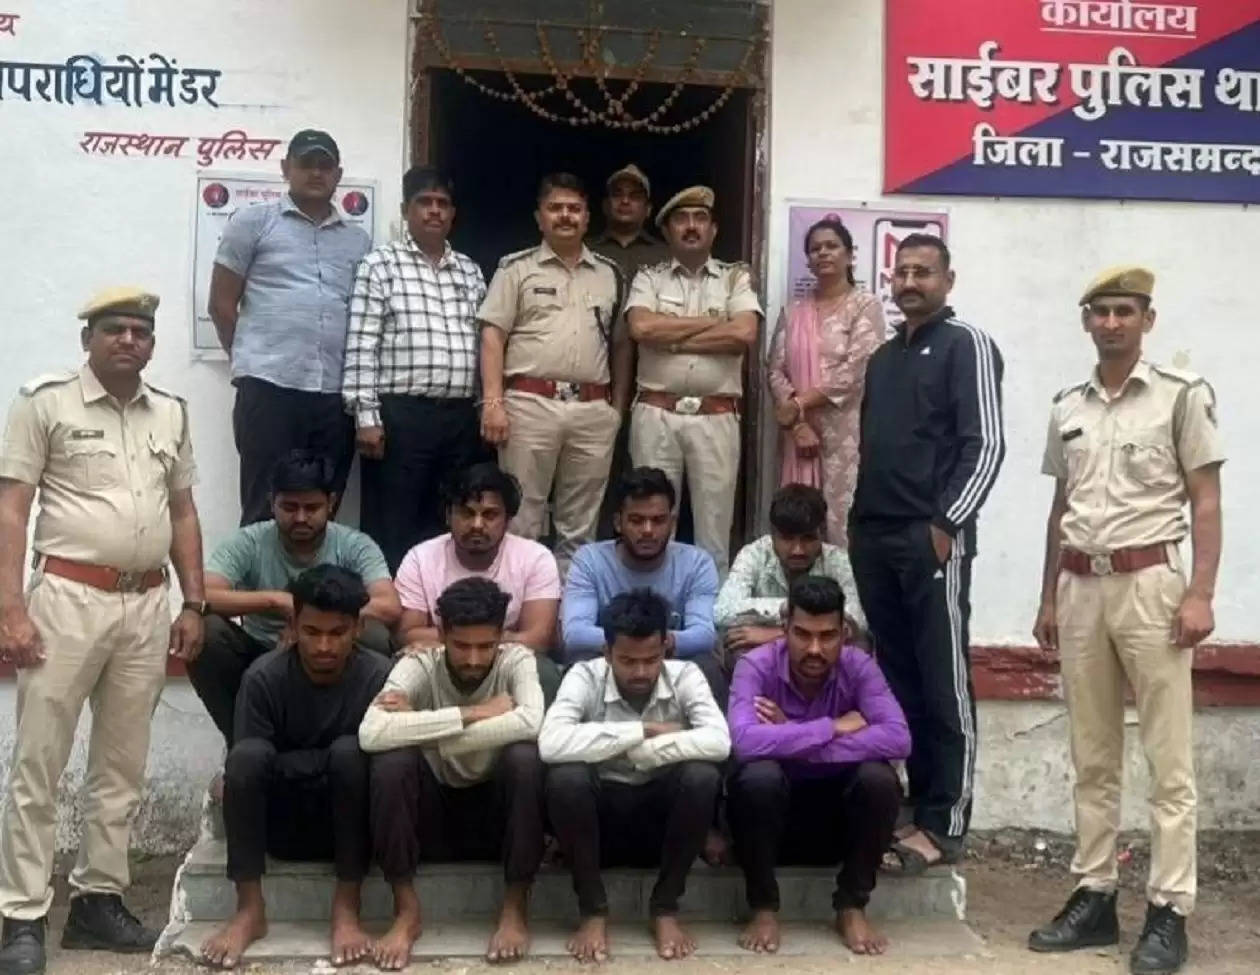 Online Fraud gang busted by Rajsamand Police